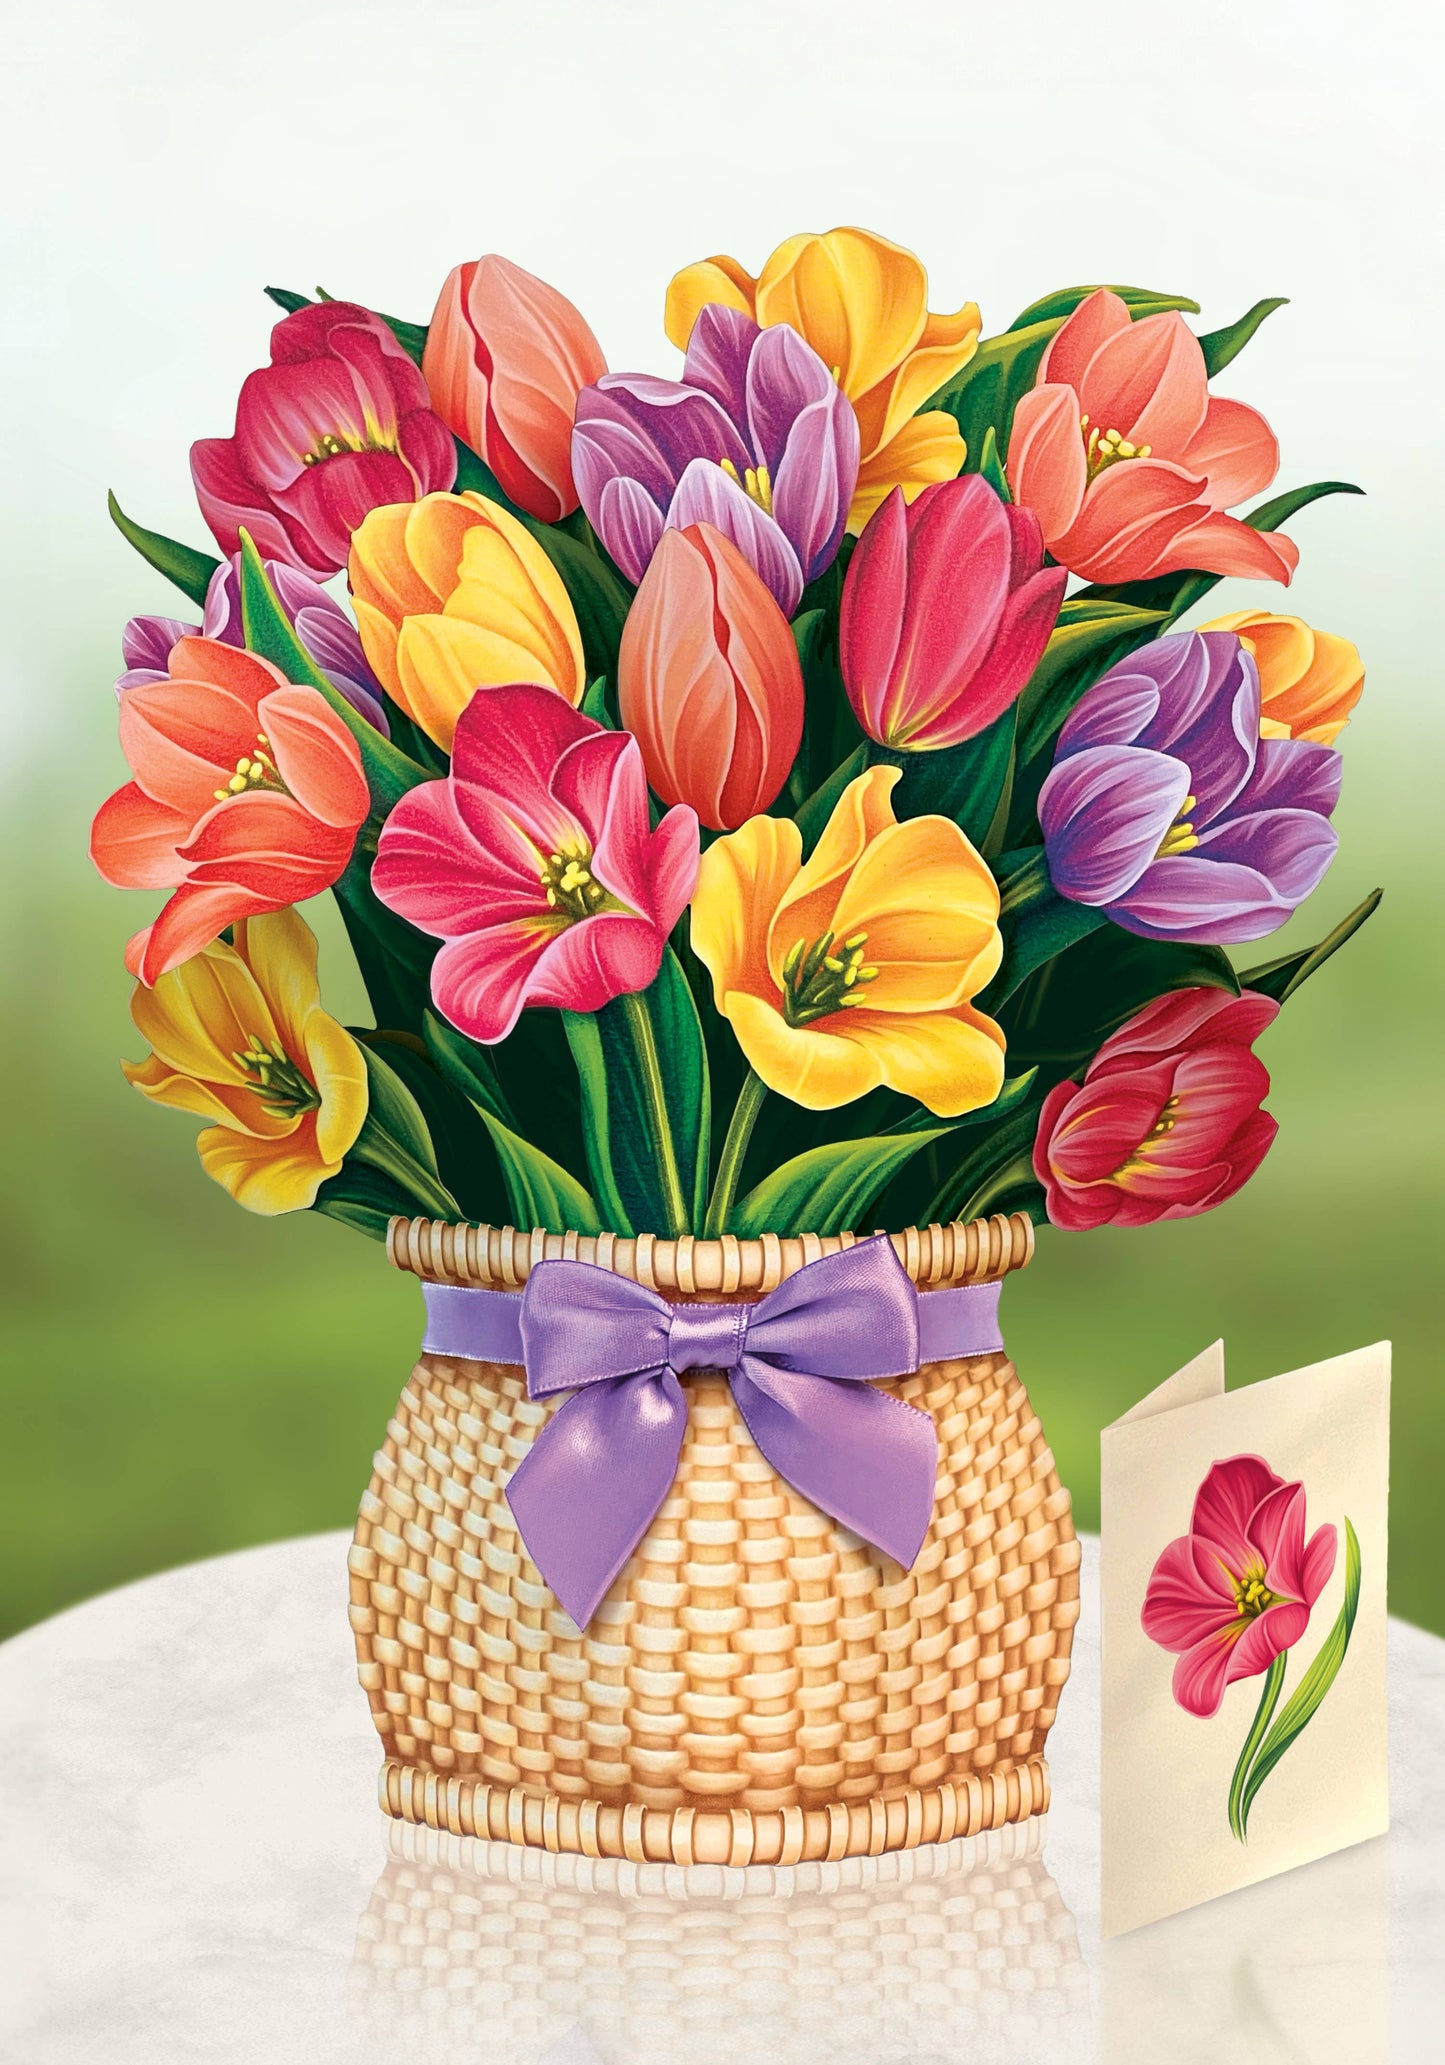 Festive Tulips Pop-up Greeting Cards